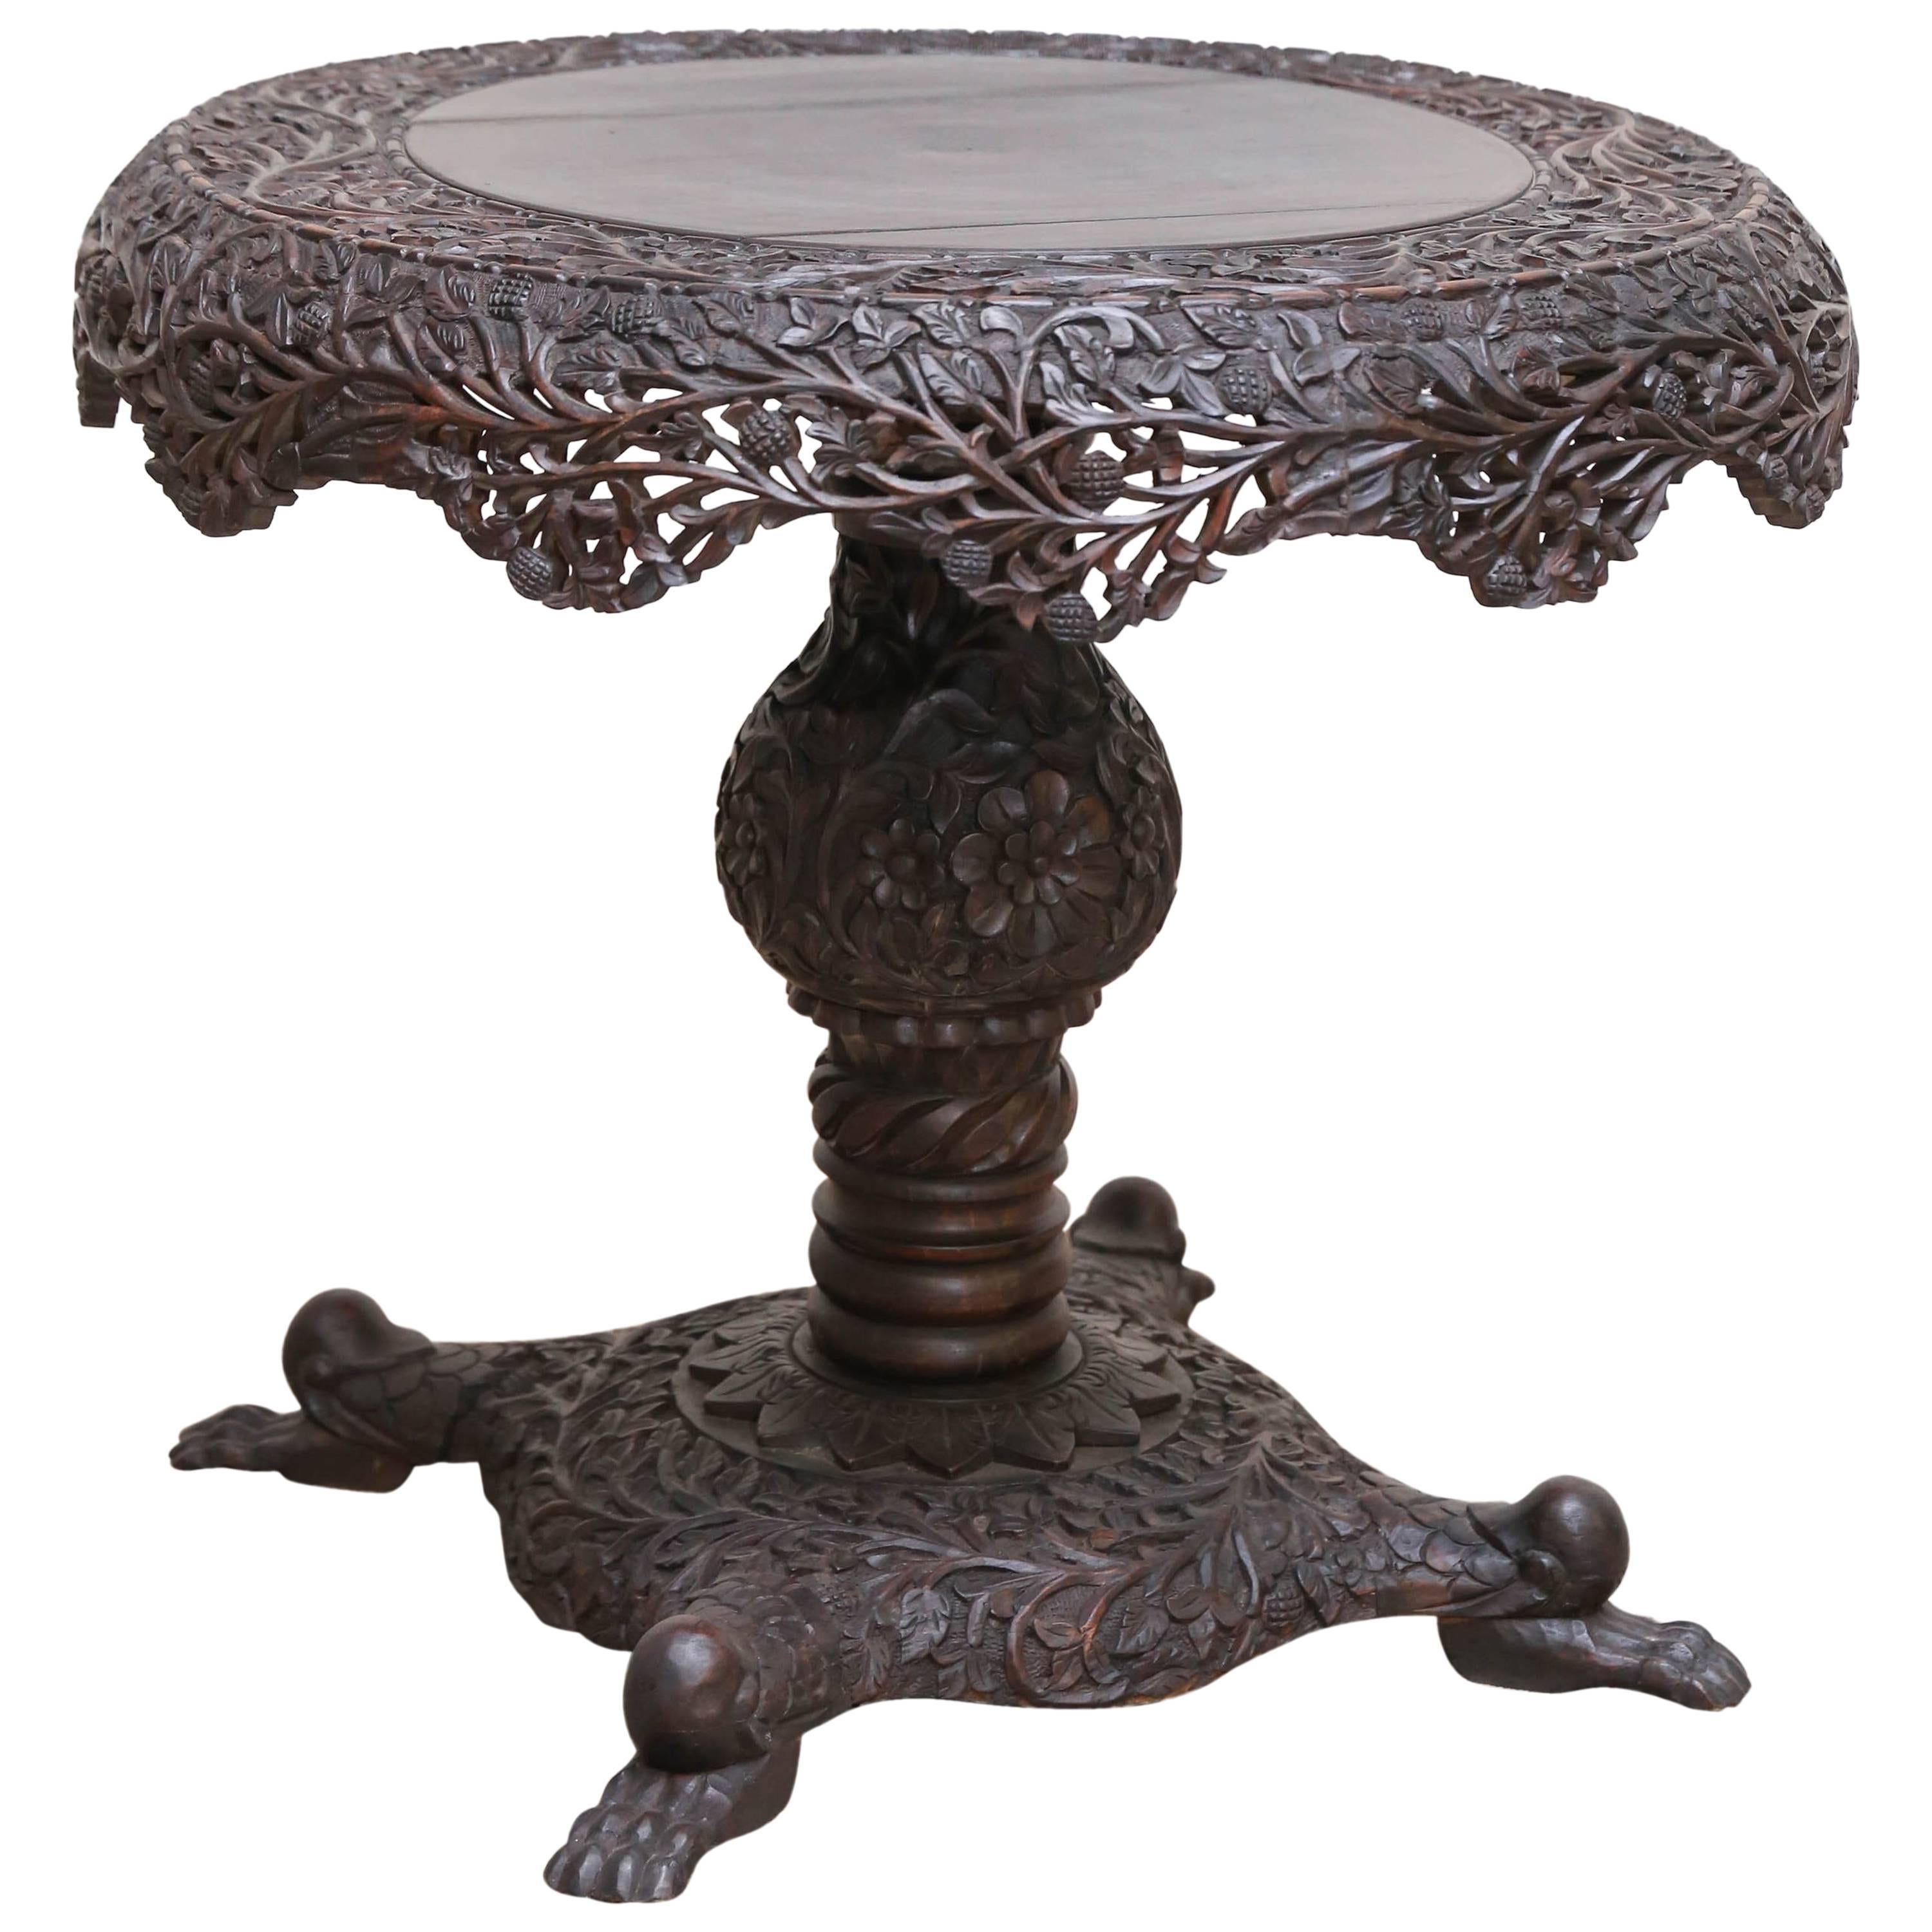 1920s Ebonized Solid Teak Wood Heavily Carved Center Table